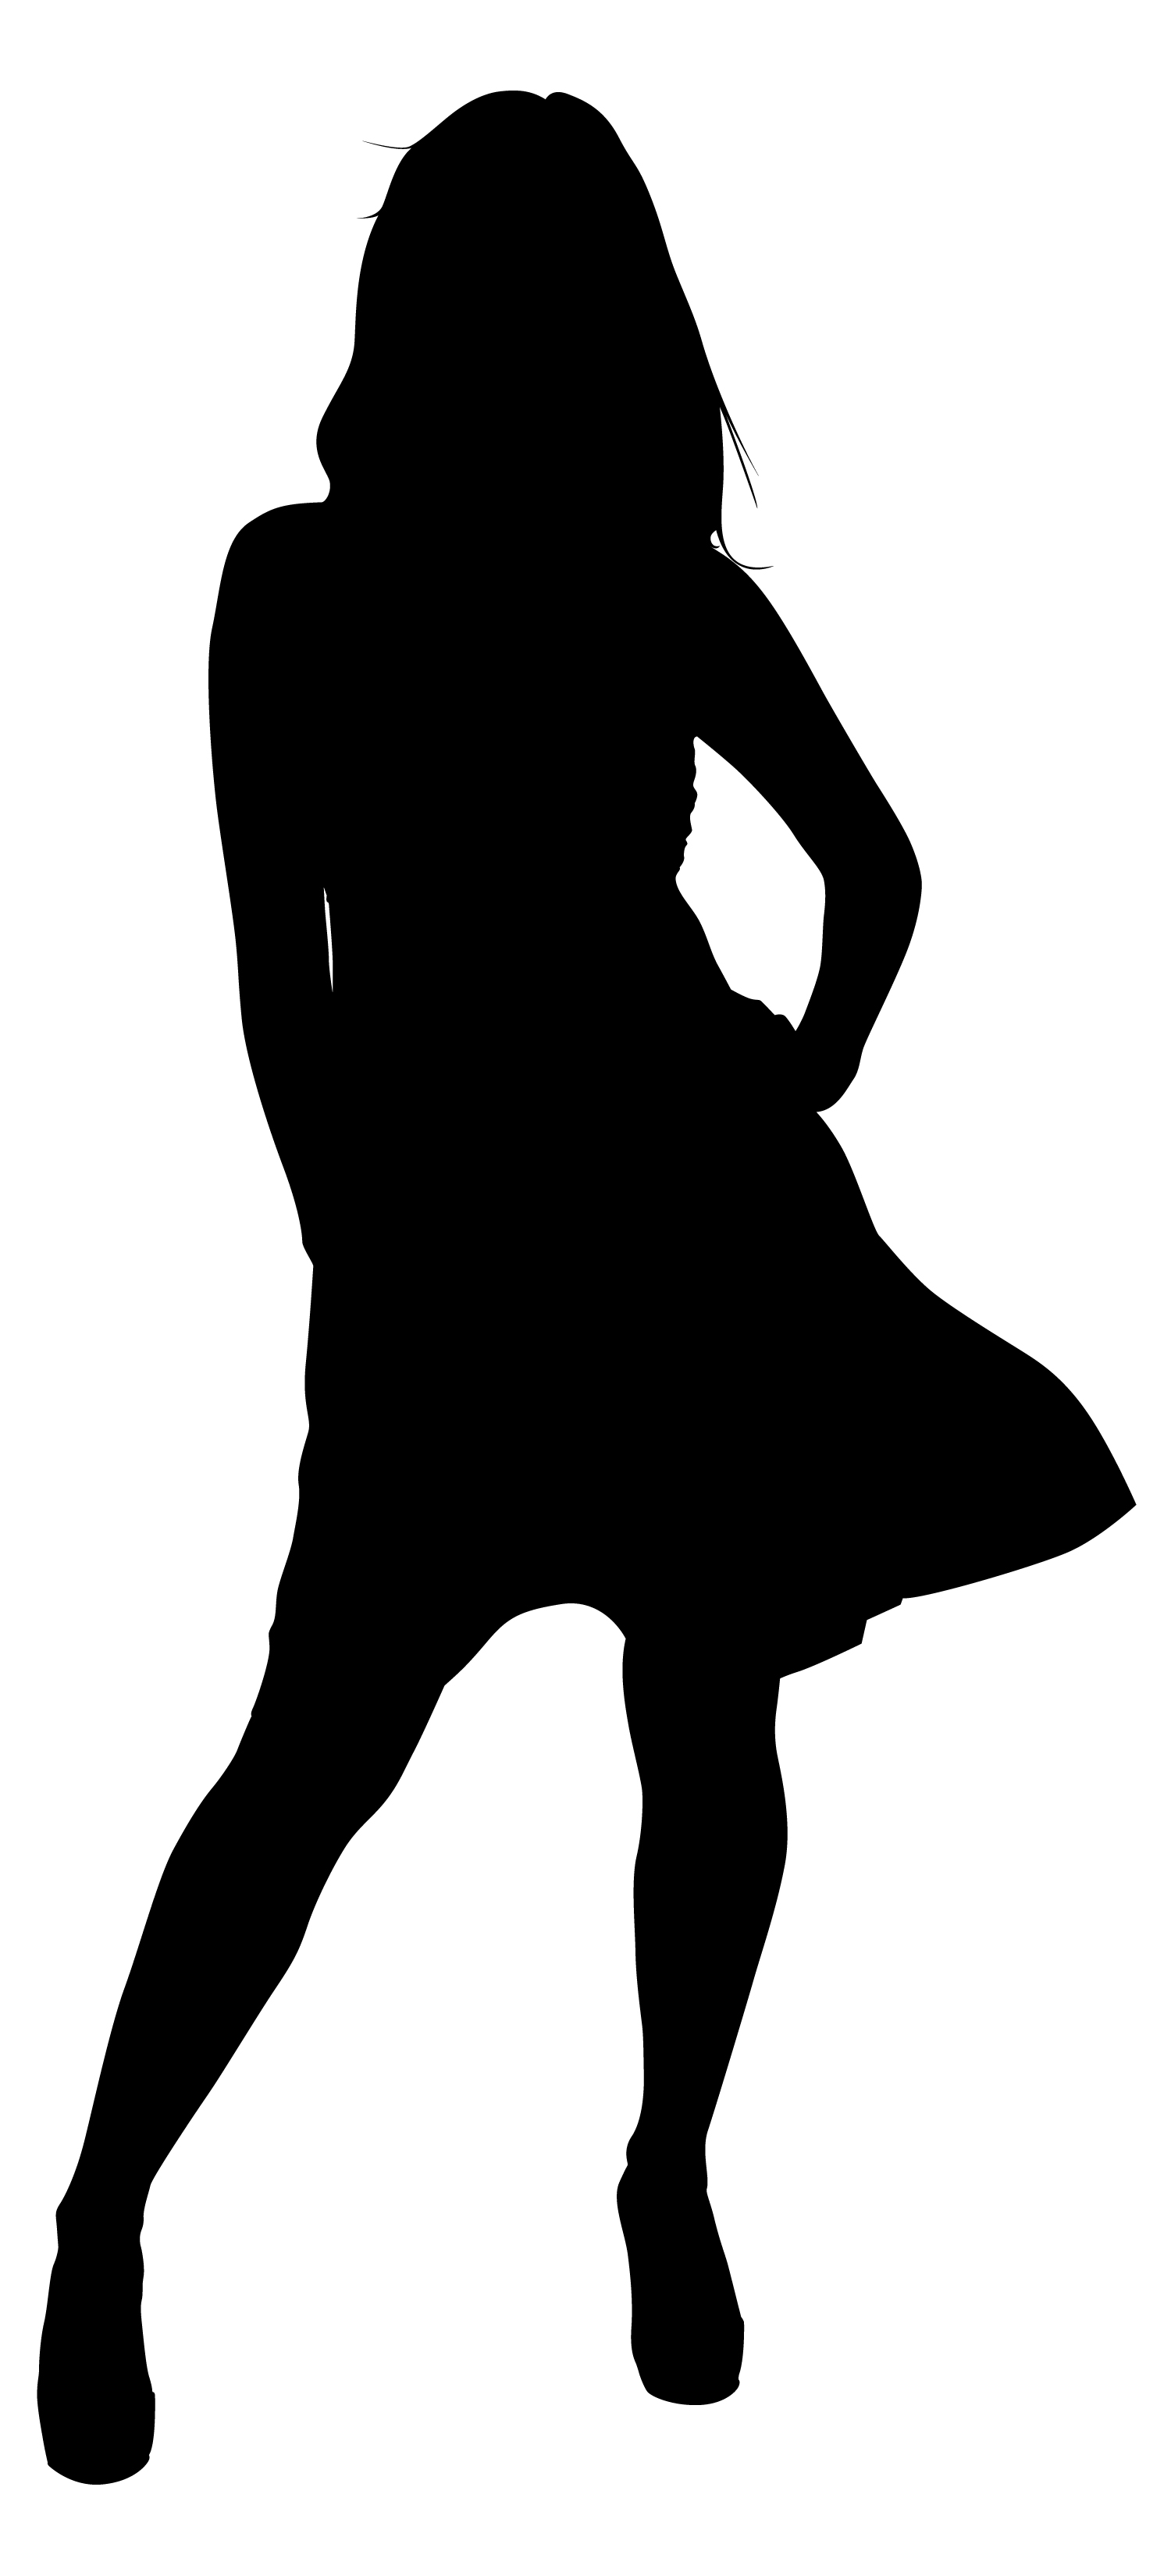 Woman Silhouette Png images  pictures - NearPics